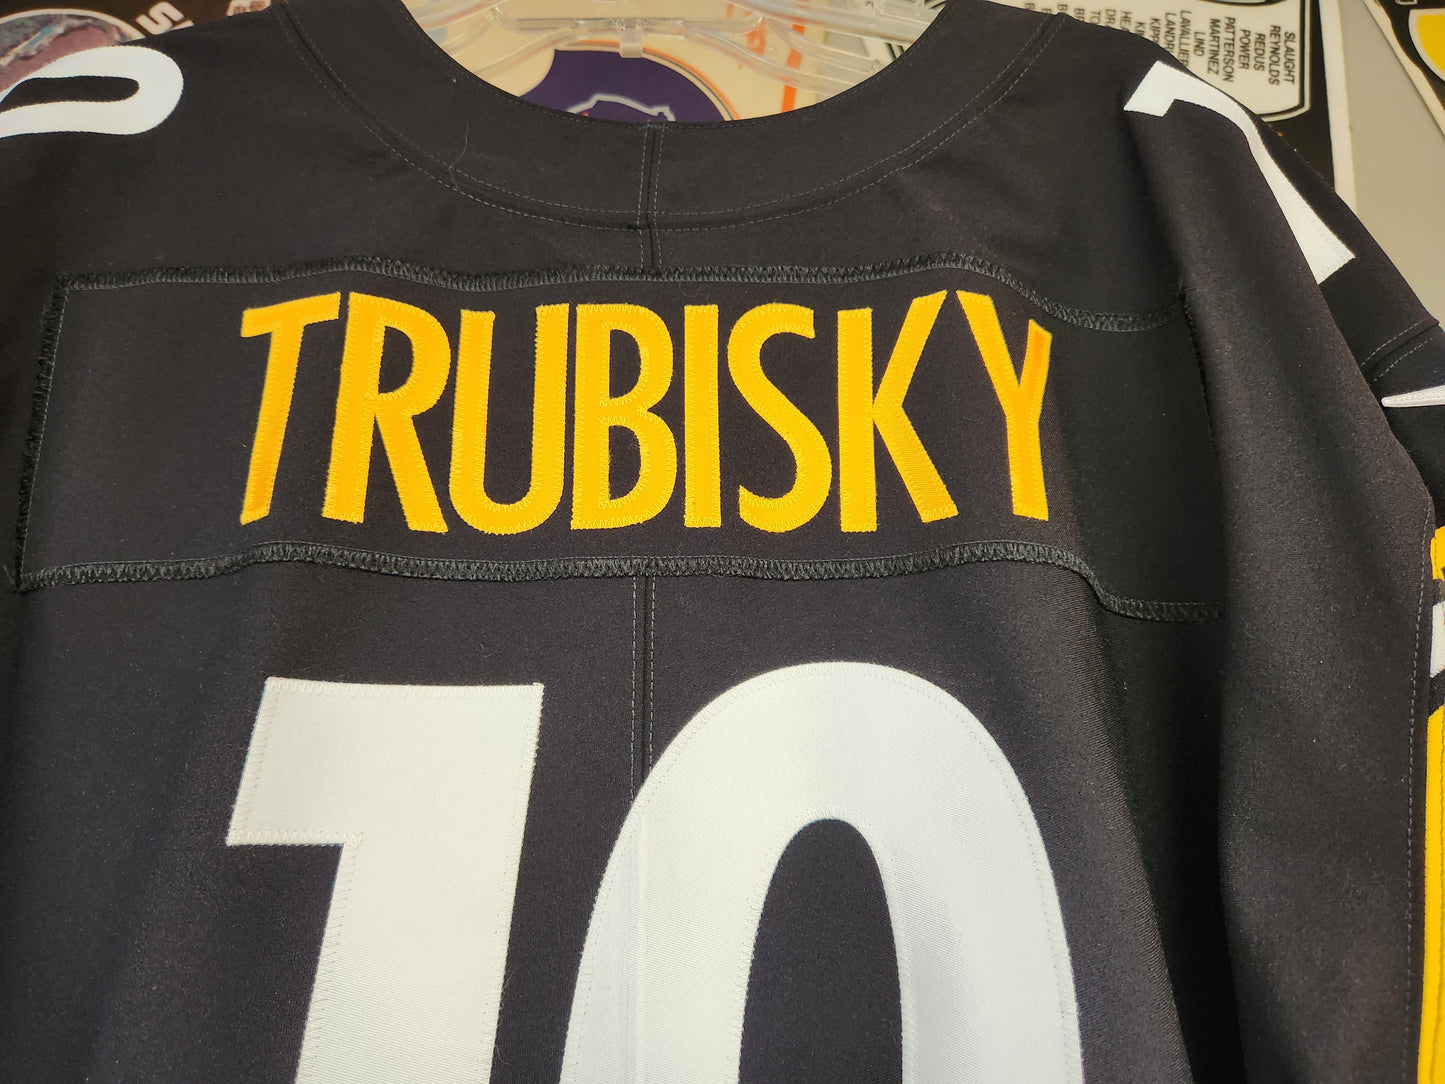 MITCH TRUBISKY #10 PITTSBURGH STEELERS 2022 HOME AUTHENTIC NIKE VAPOR ELITE FOOTBALL JERSEY sz 52 NWT